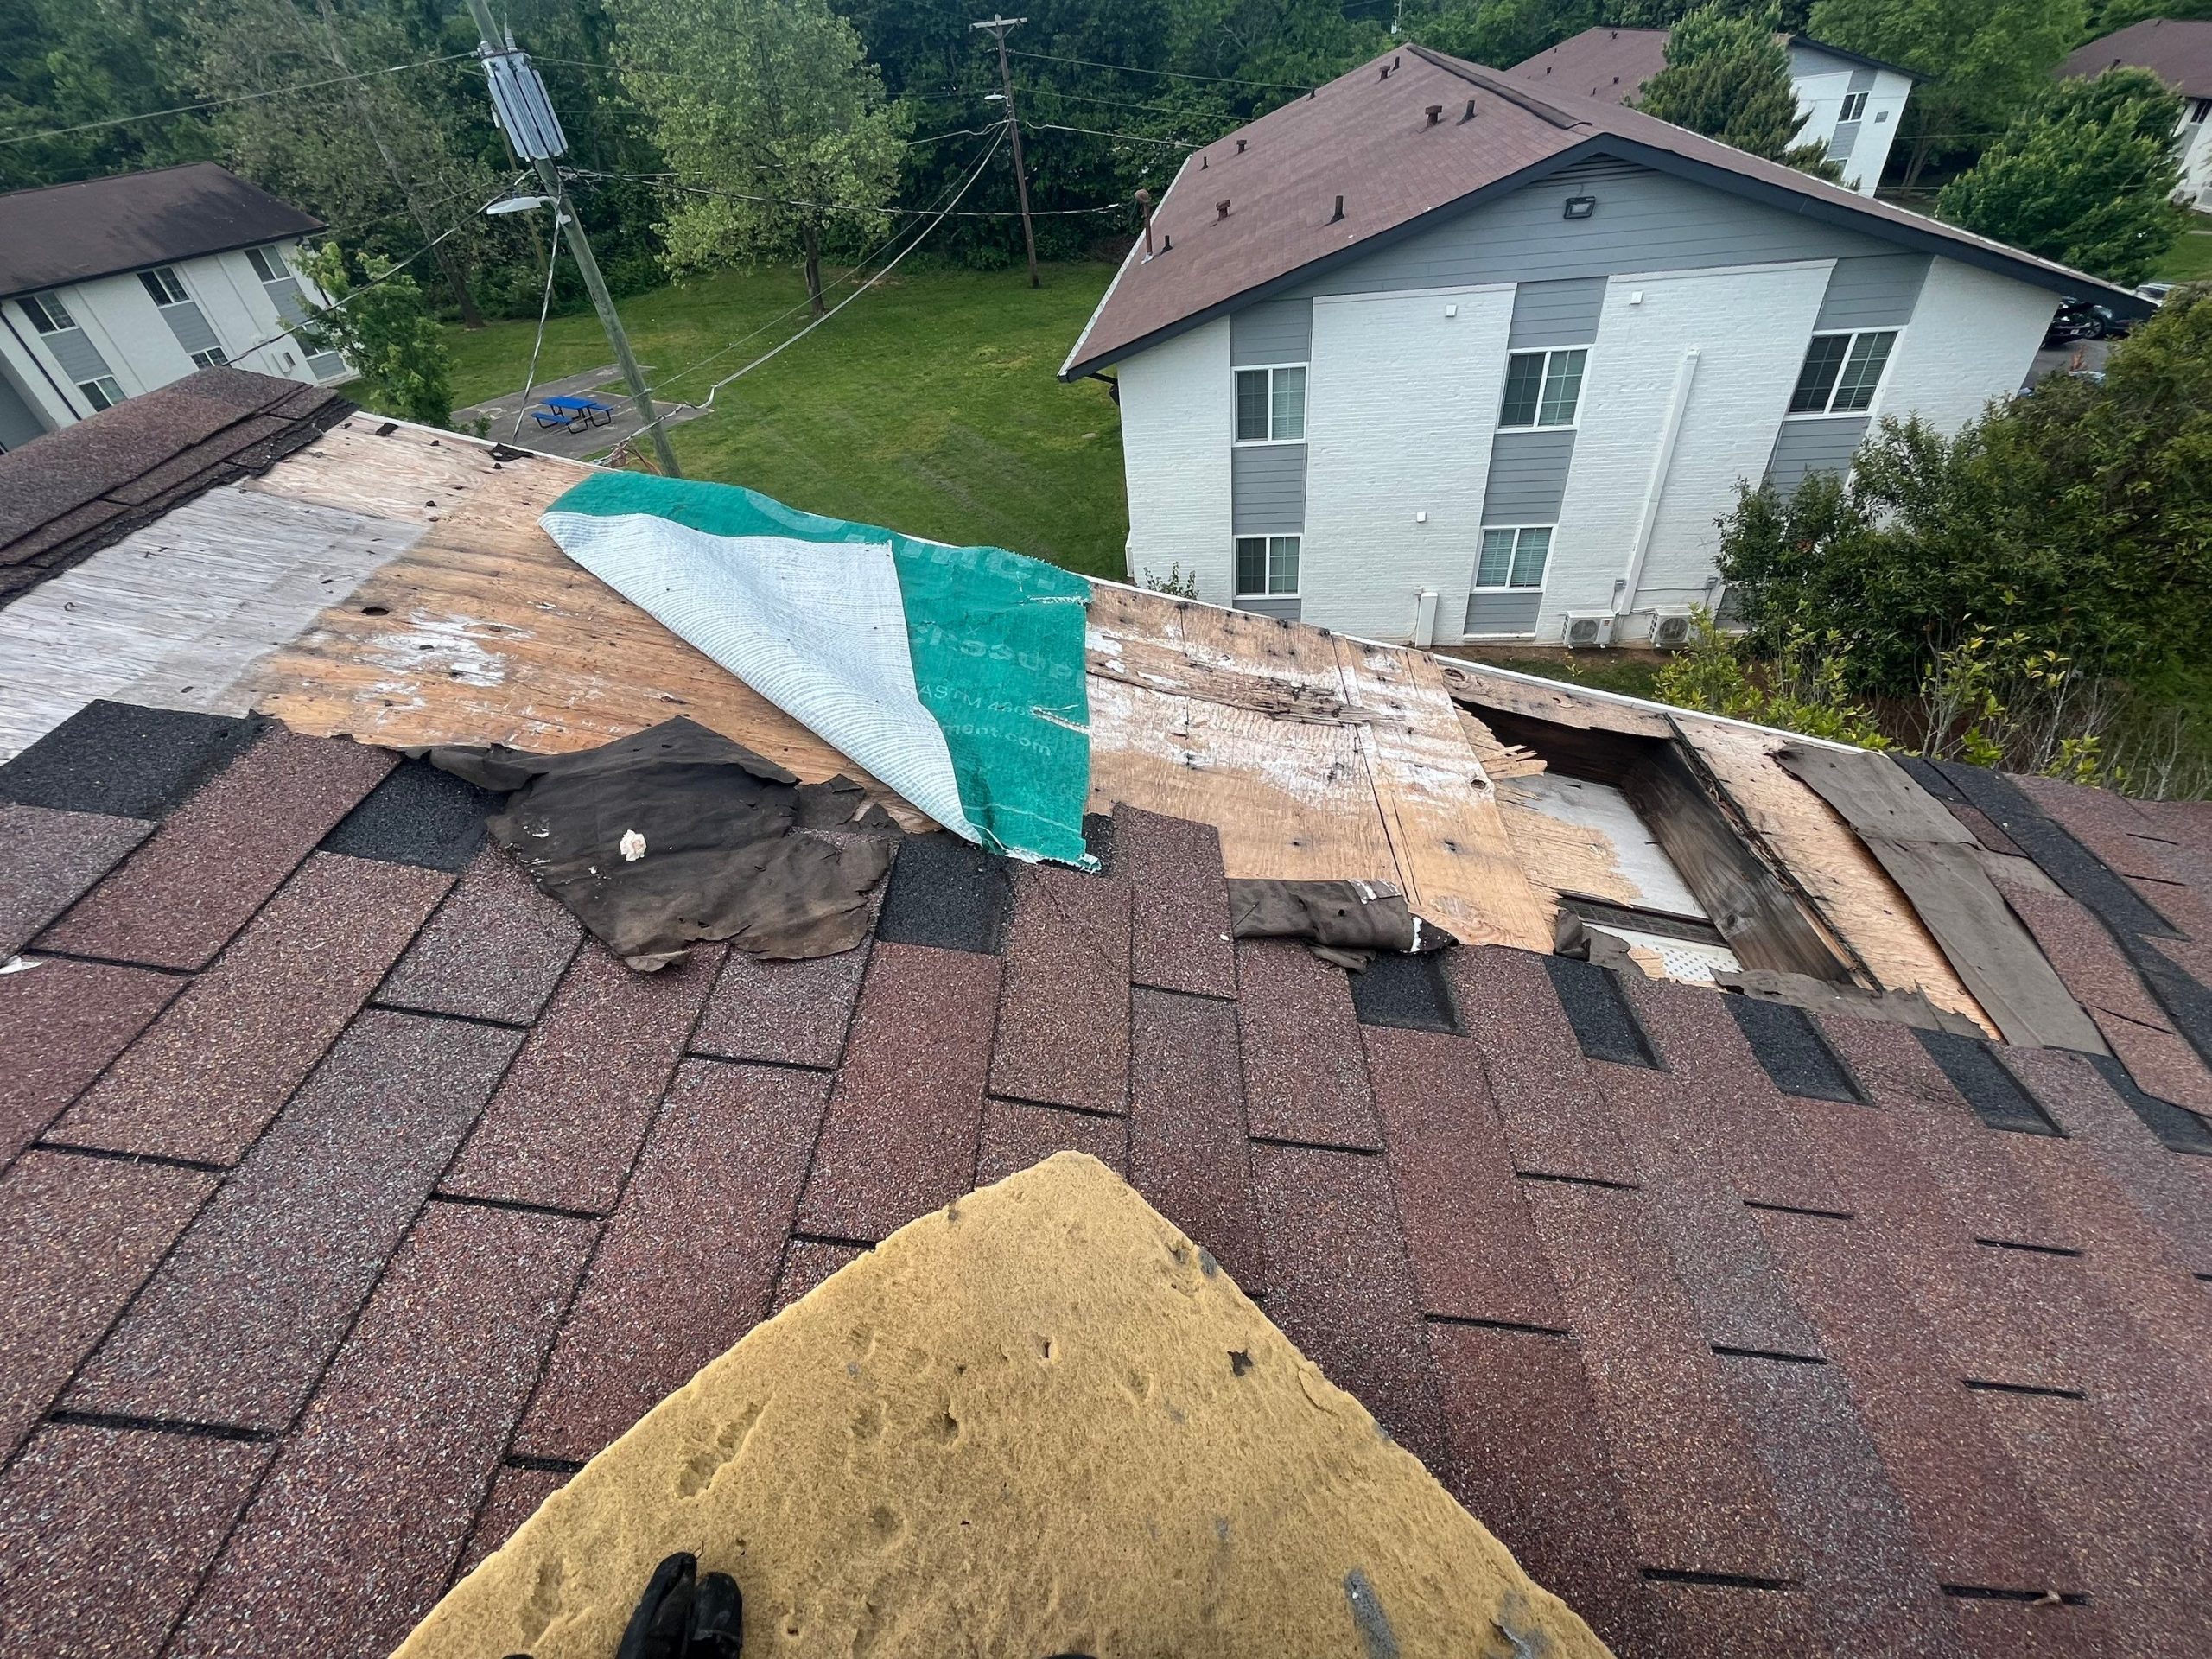 Rotting boards and hole in roof